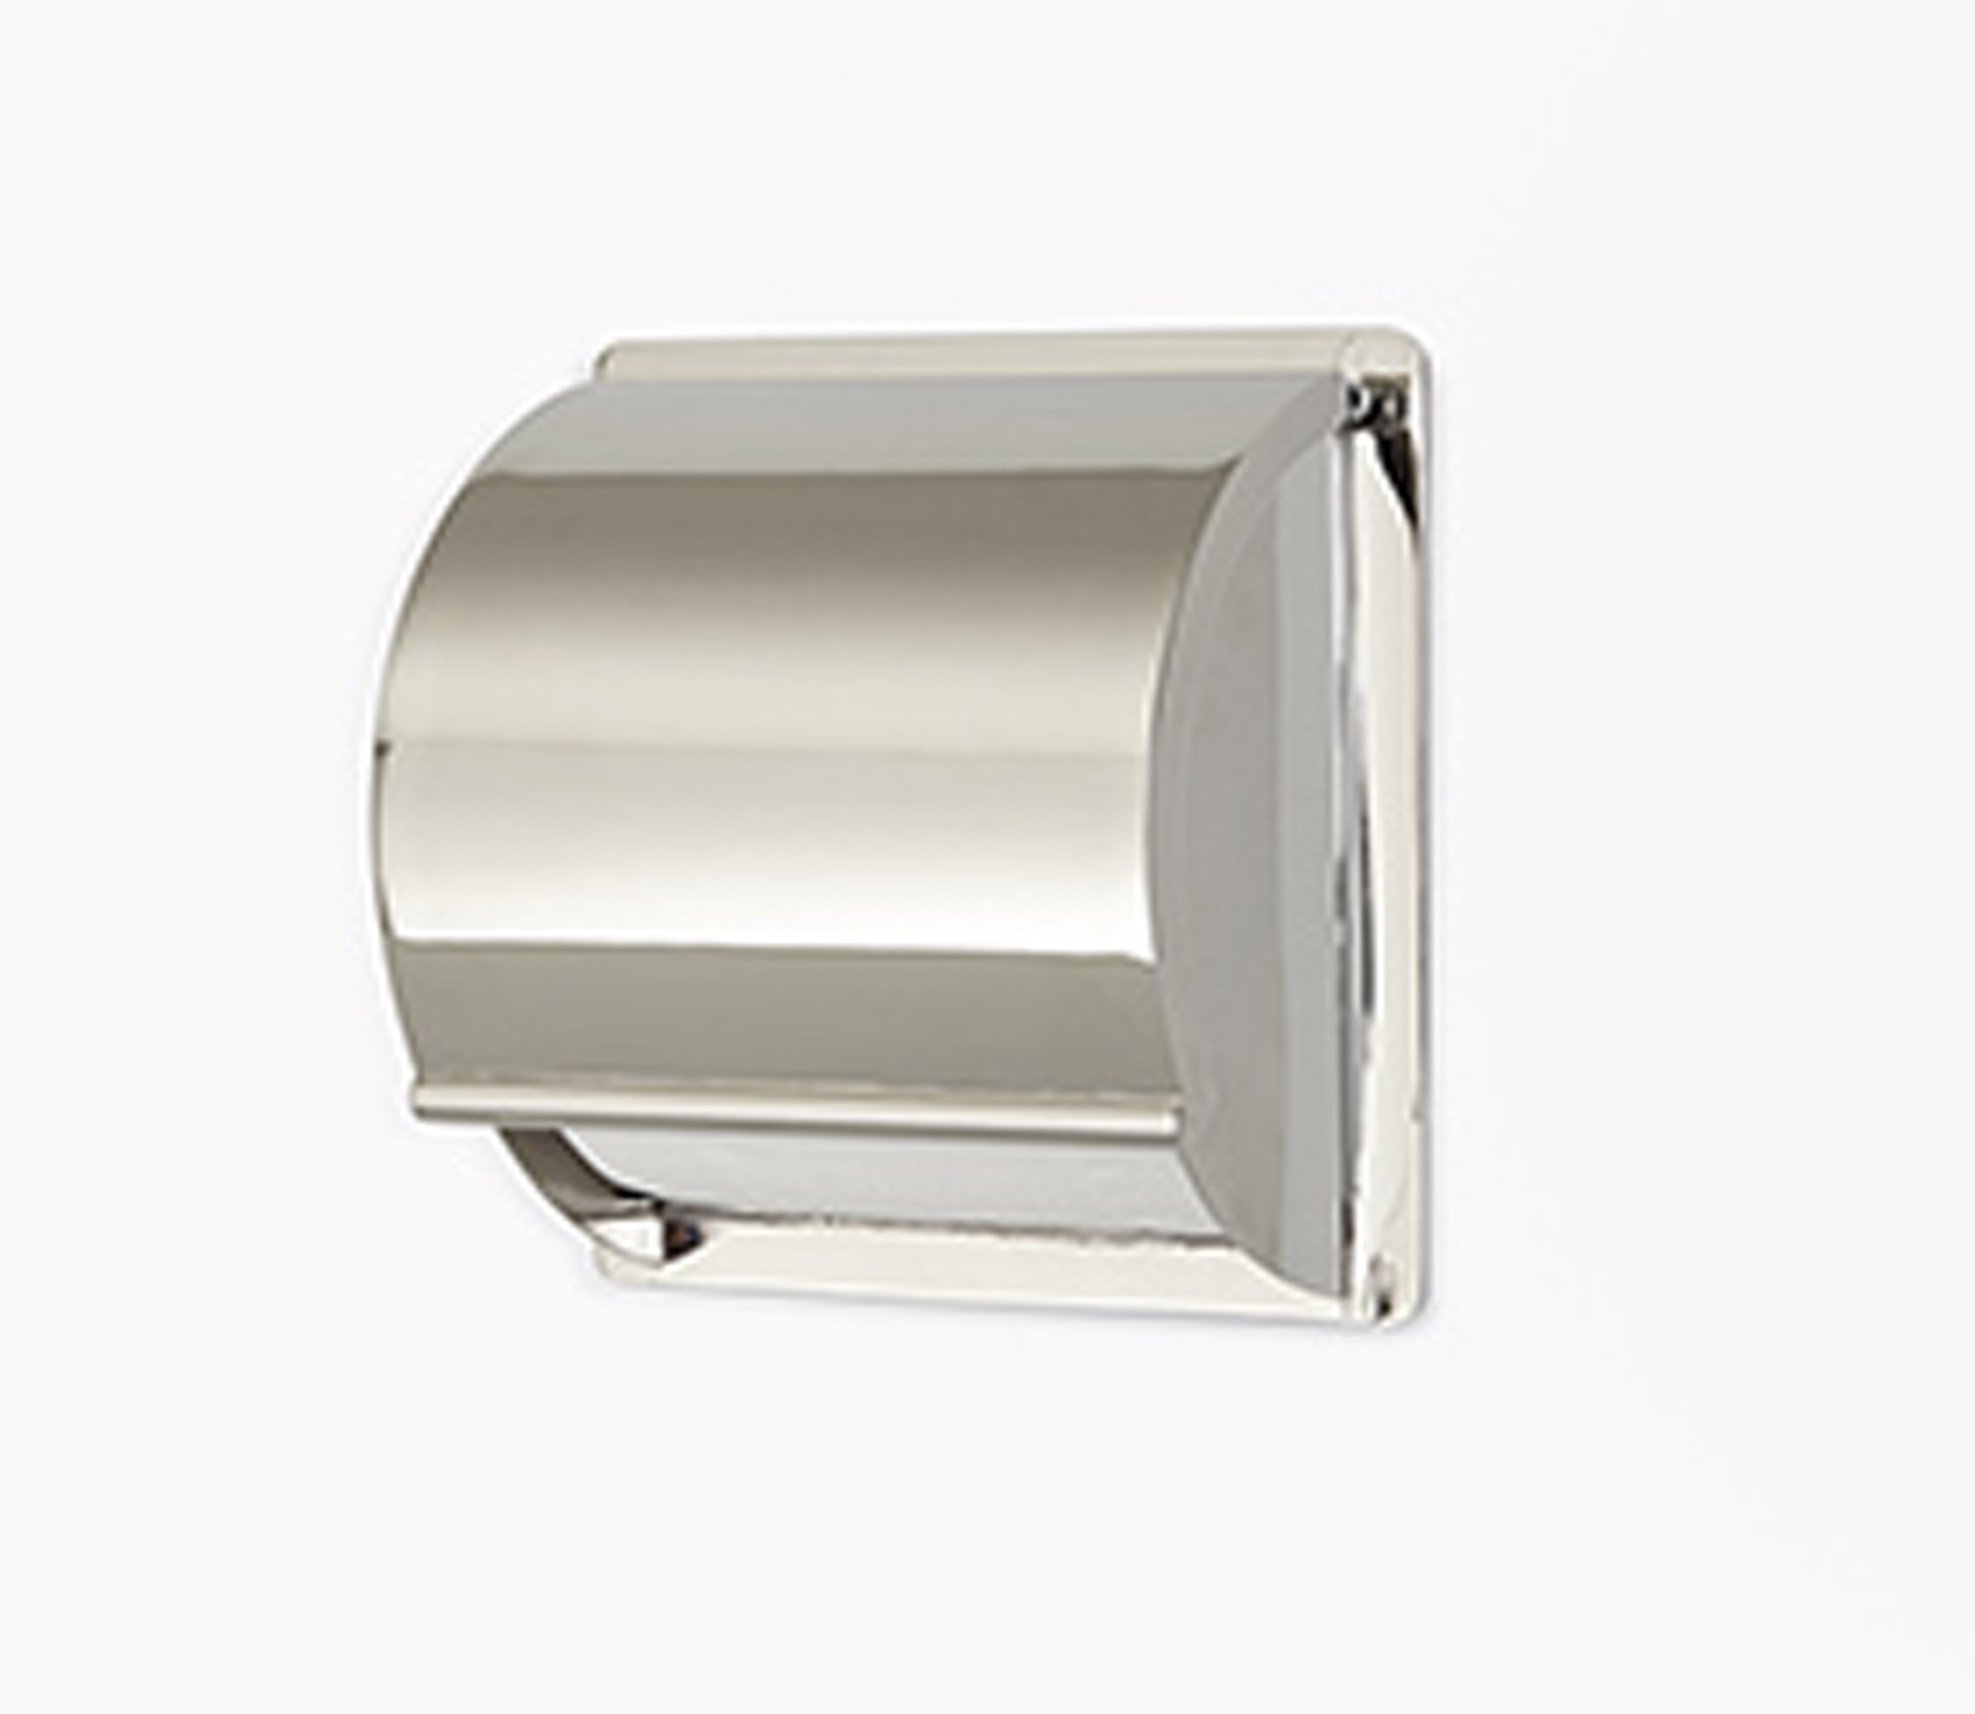 Wall Recessed Toilet Paper Holder Product Image 1